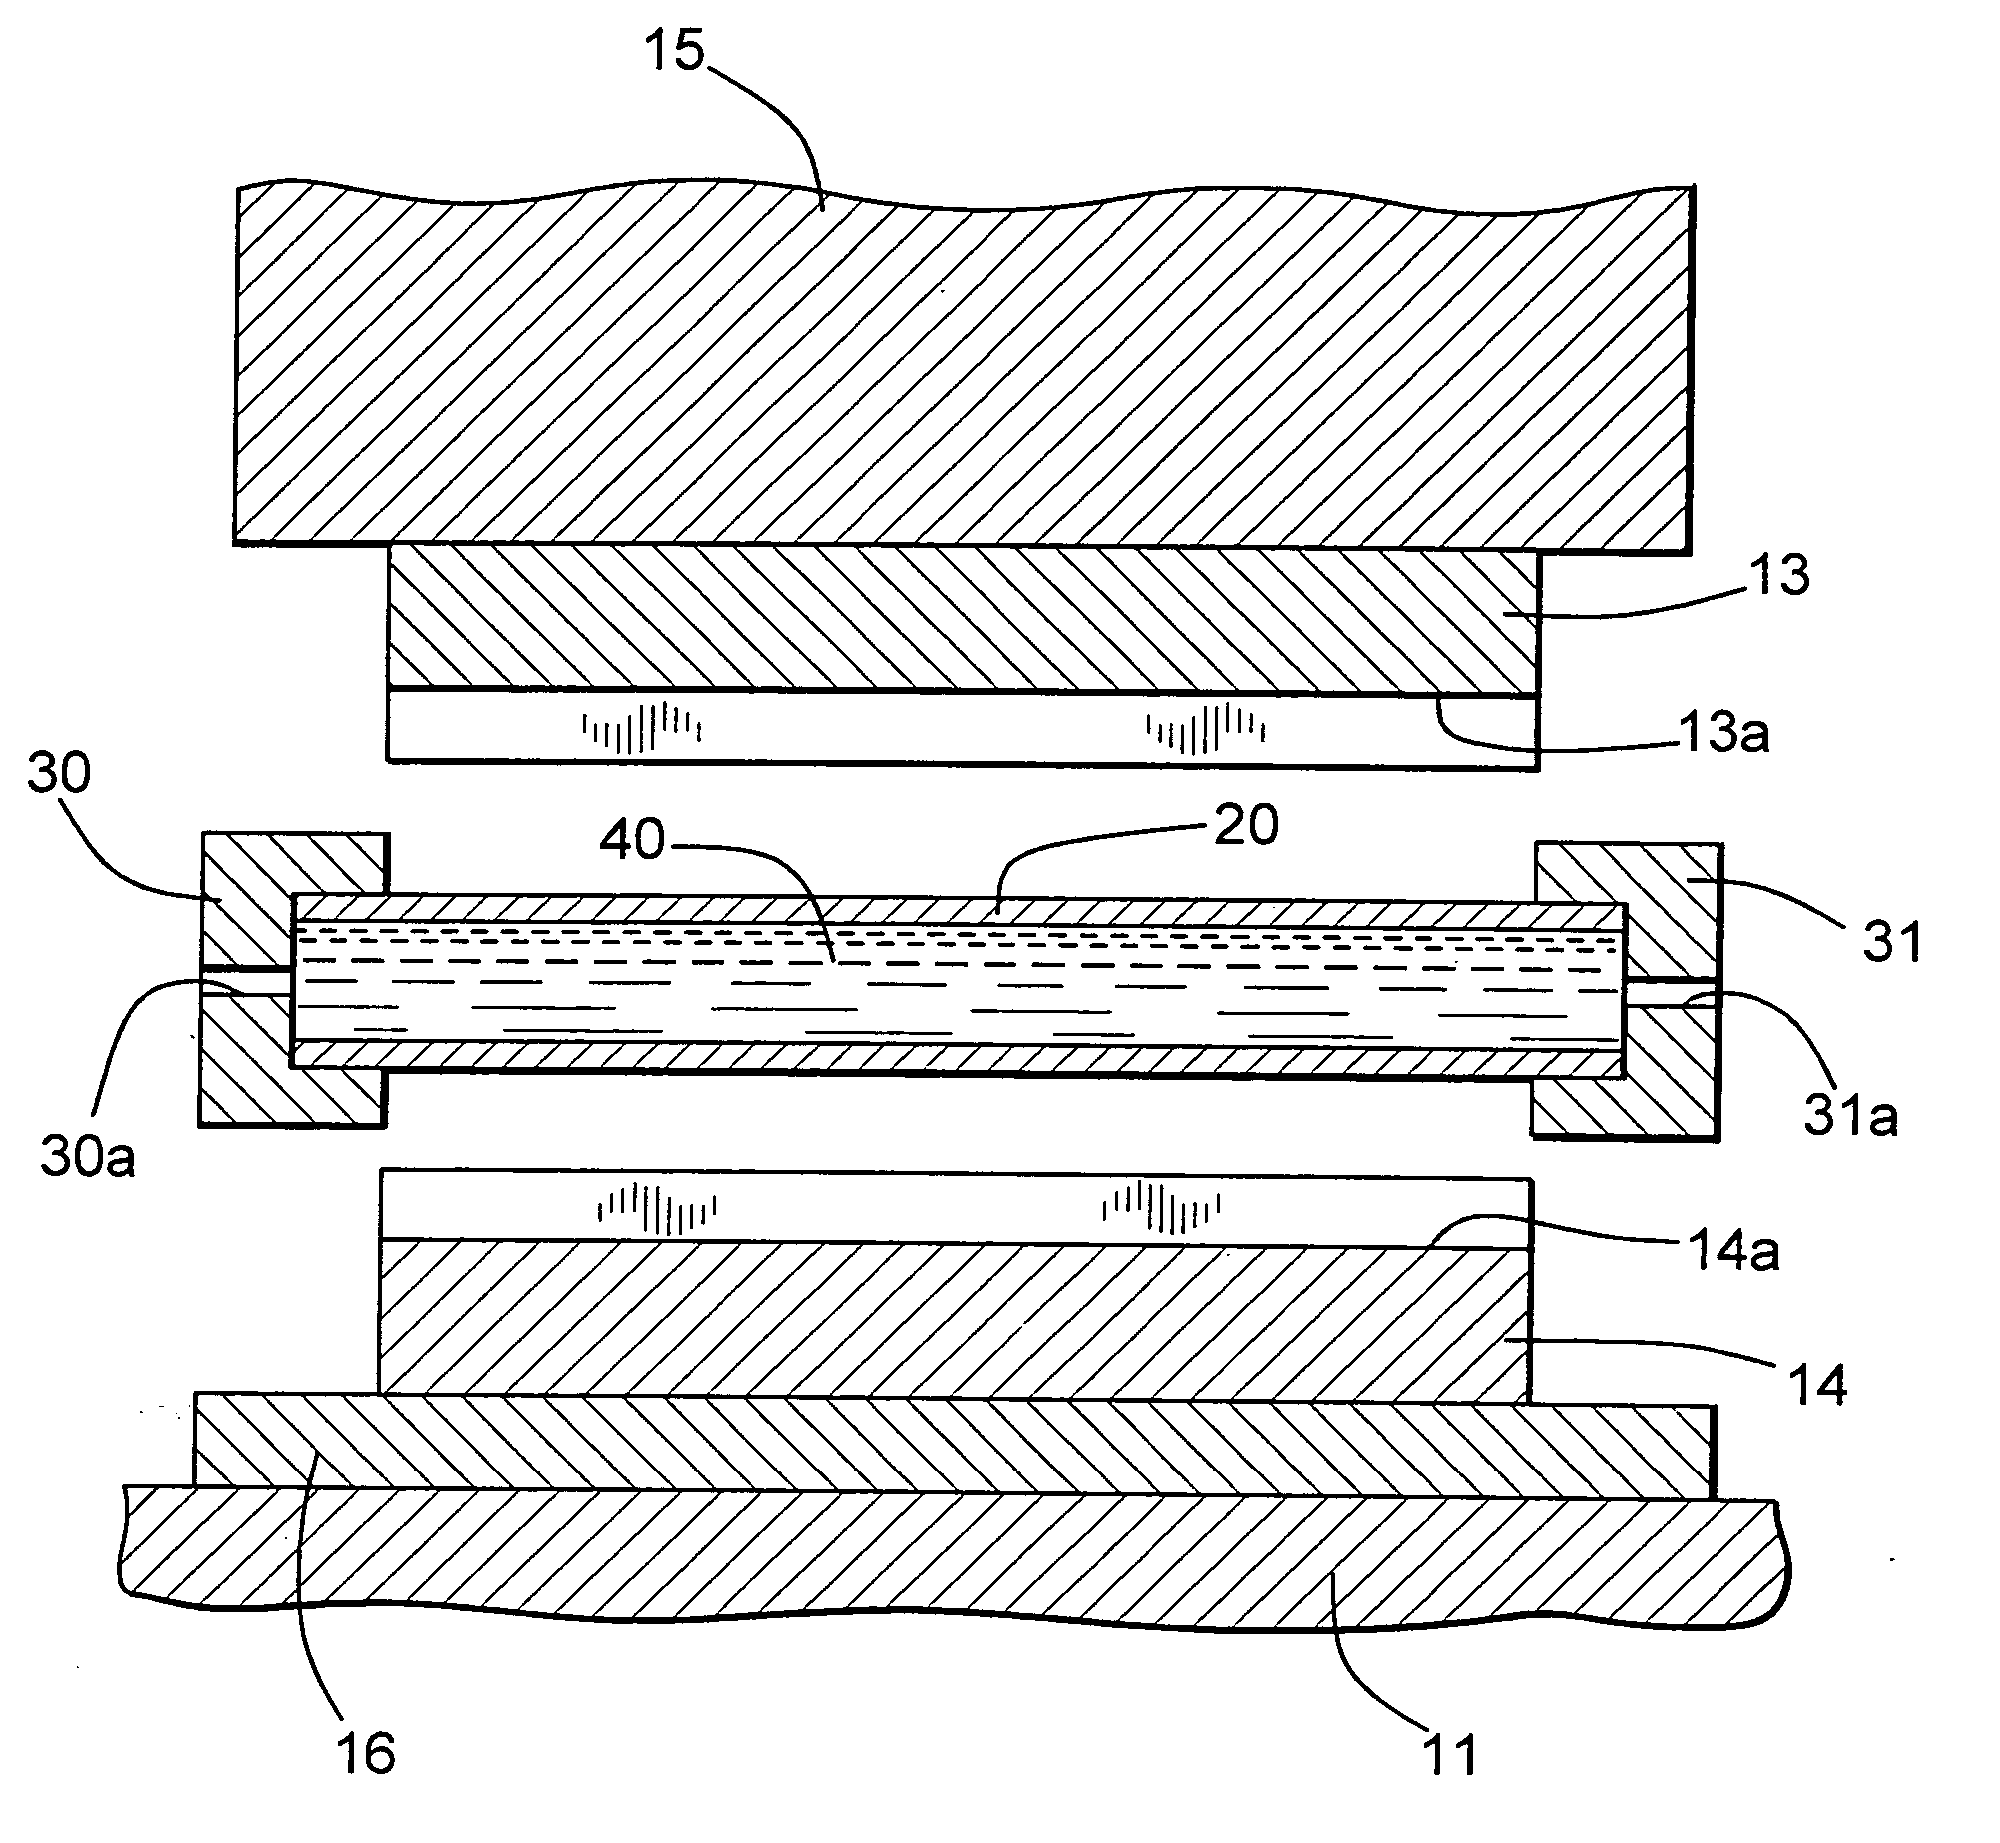 Method for performing a hydroforming operation